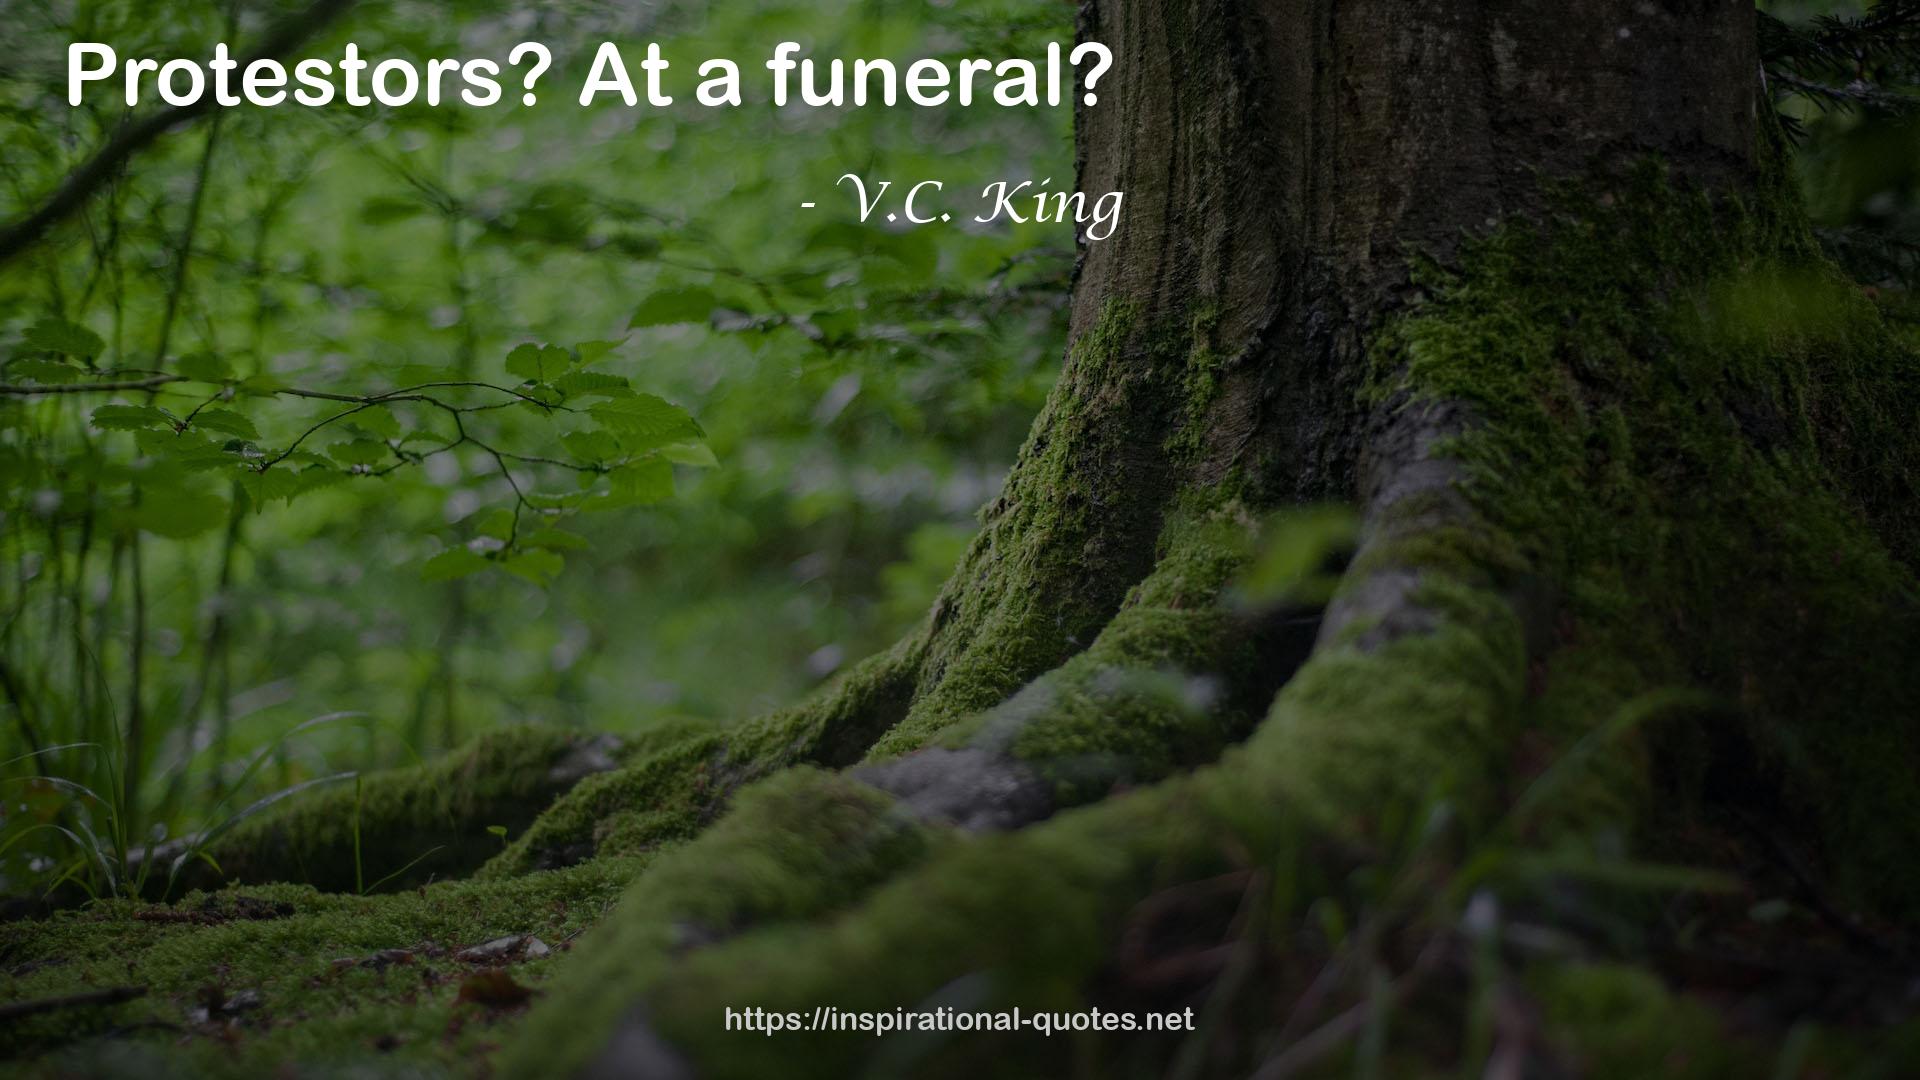 V.C. King QUOTES